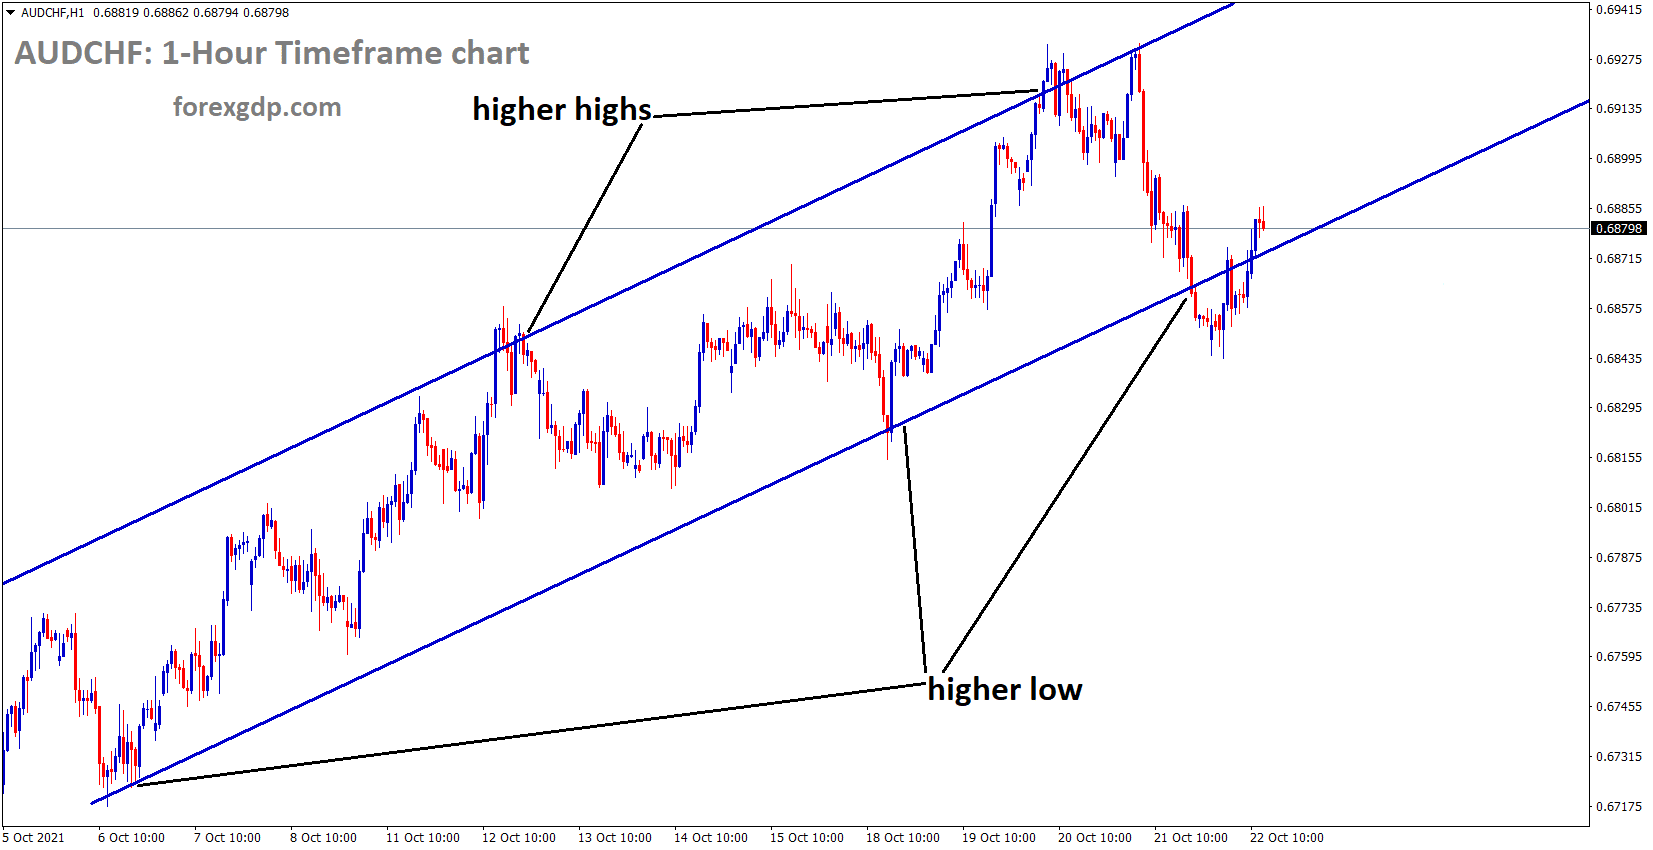 AUDCHF is moving in an Ascending channel